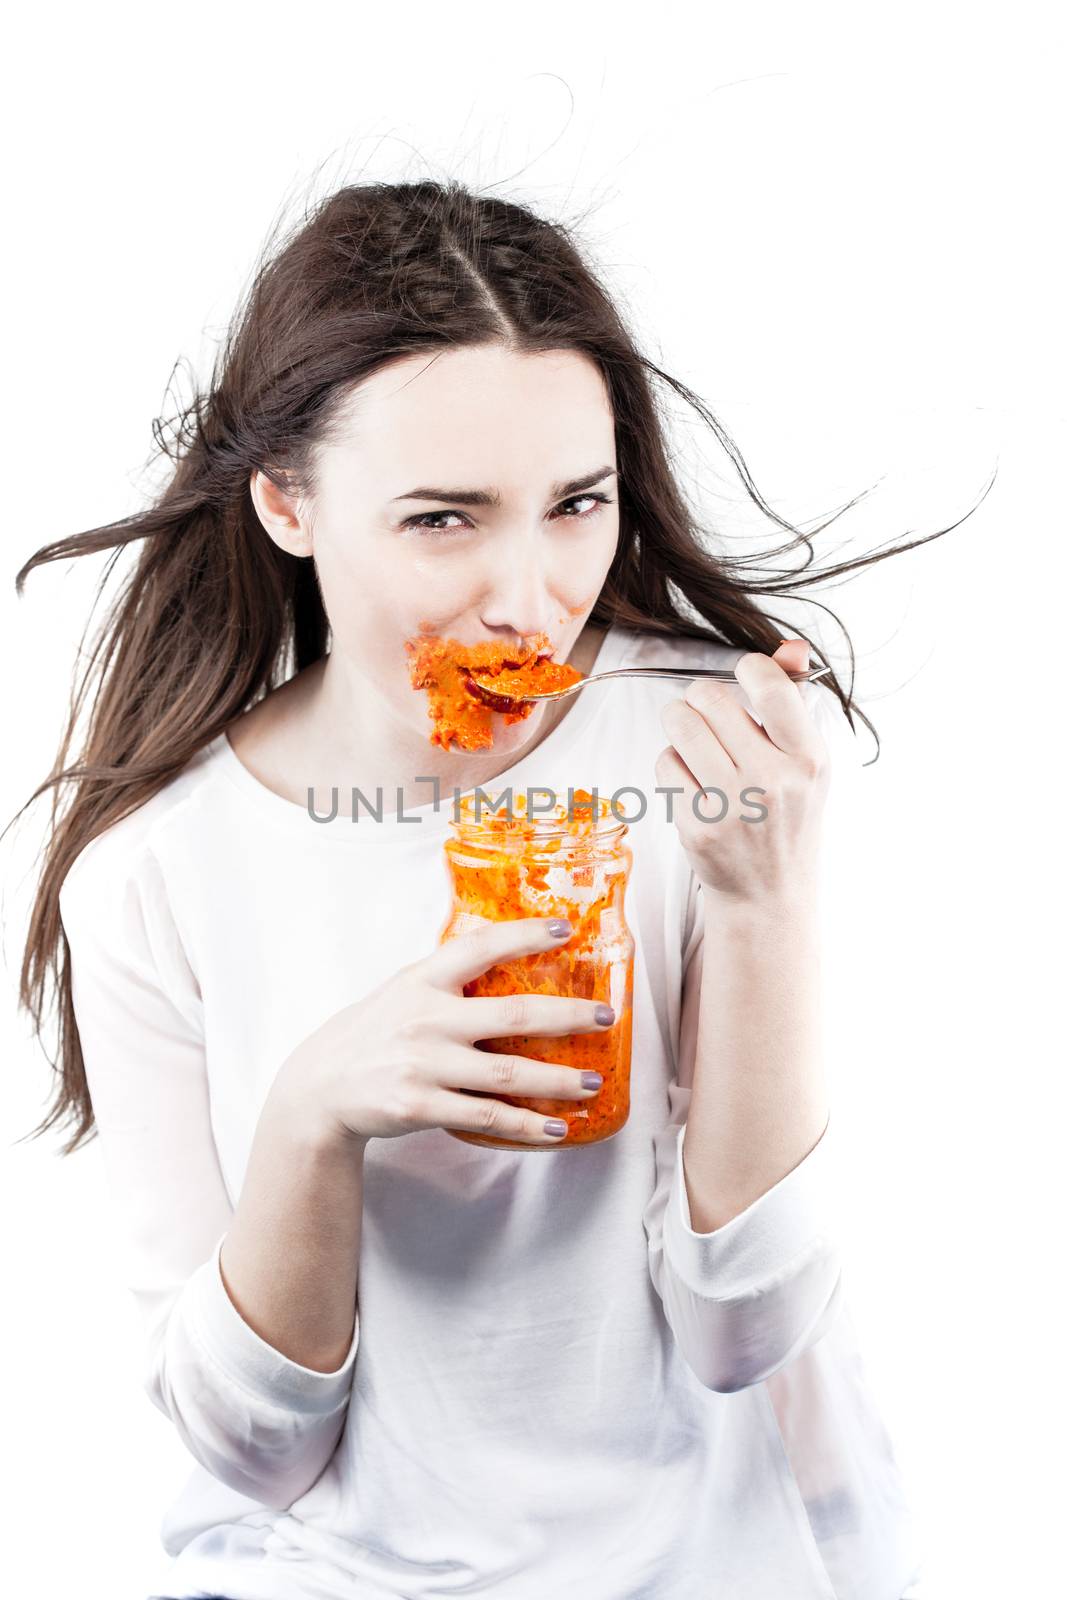 girl eating ajvar, roasted red pepper and eggplant from a jar, getting all messy around the mouth